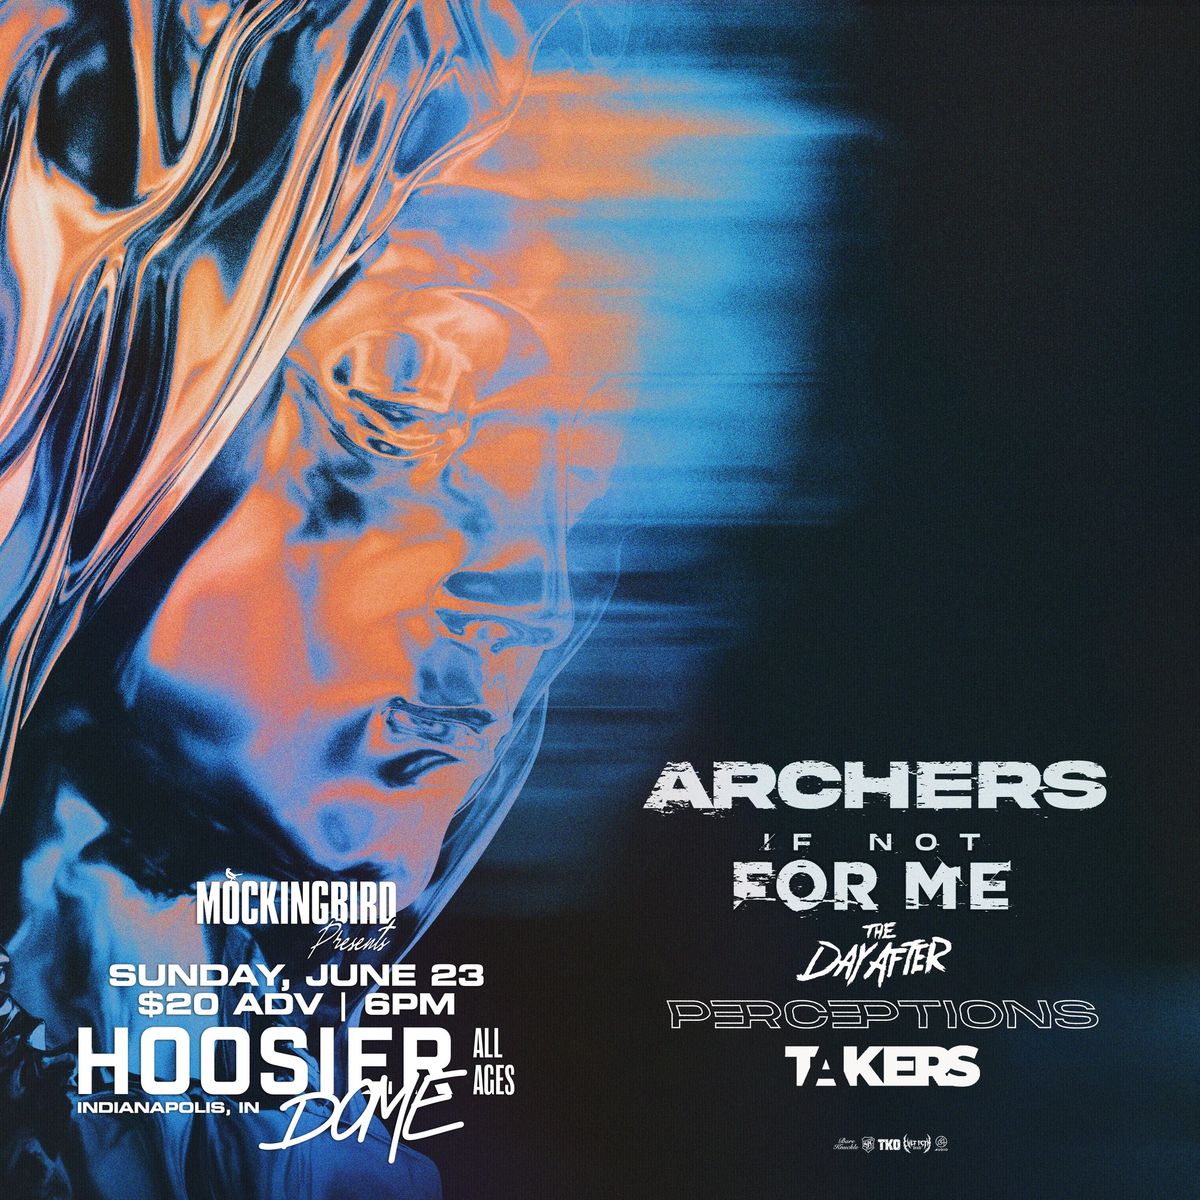 Mockingbird Presents: ARCHERS & If Not For Me at the Hoosier Dome